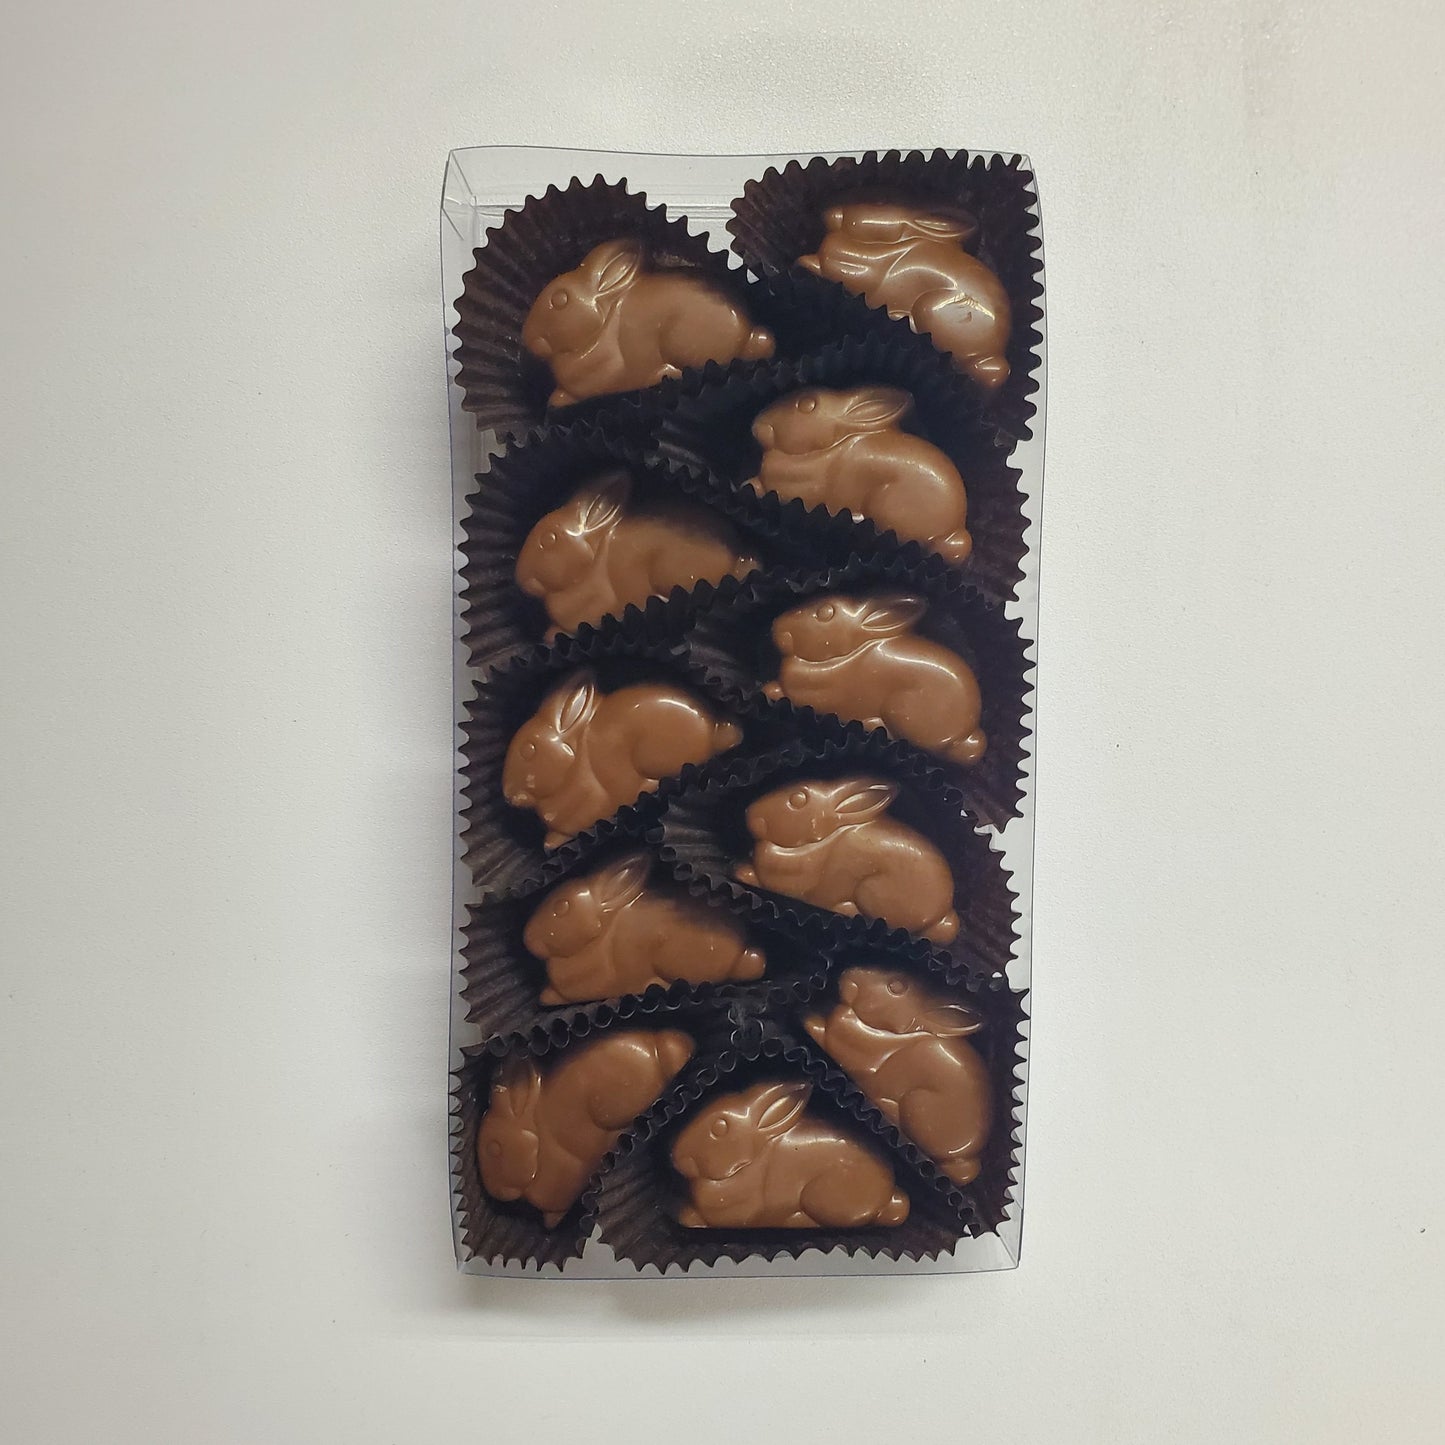 Milk chocolate and caramel bite sized bunny candies